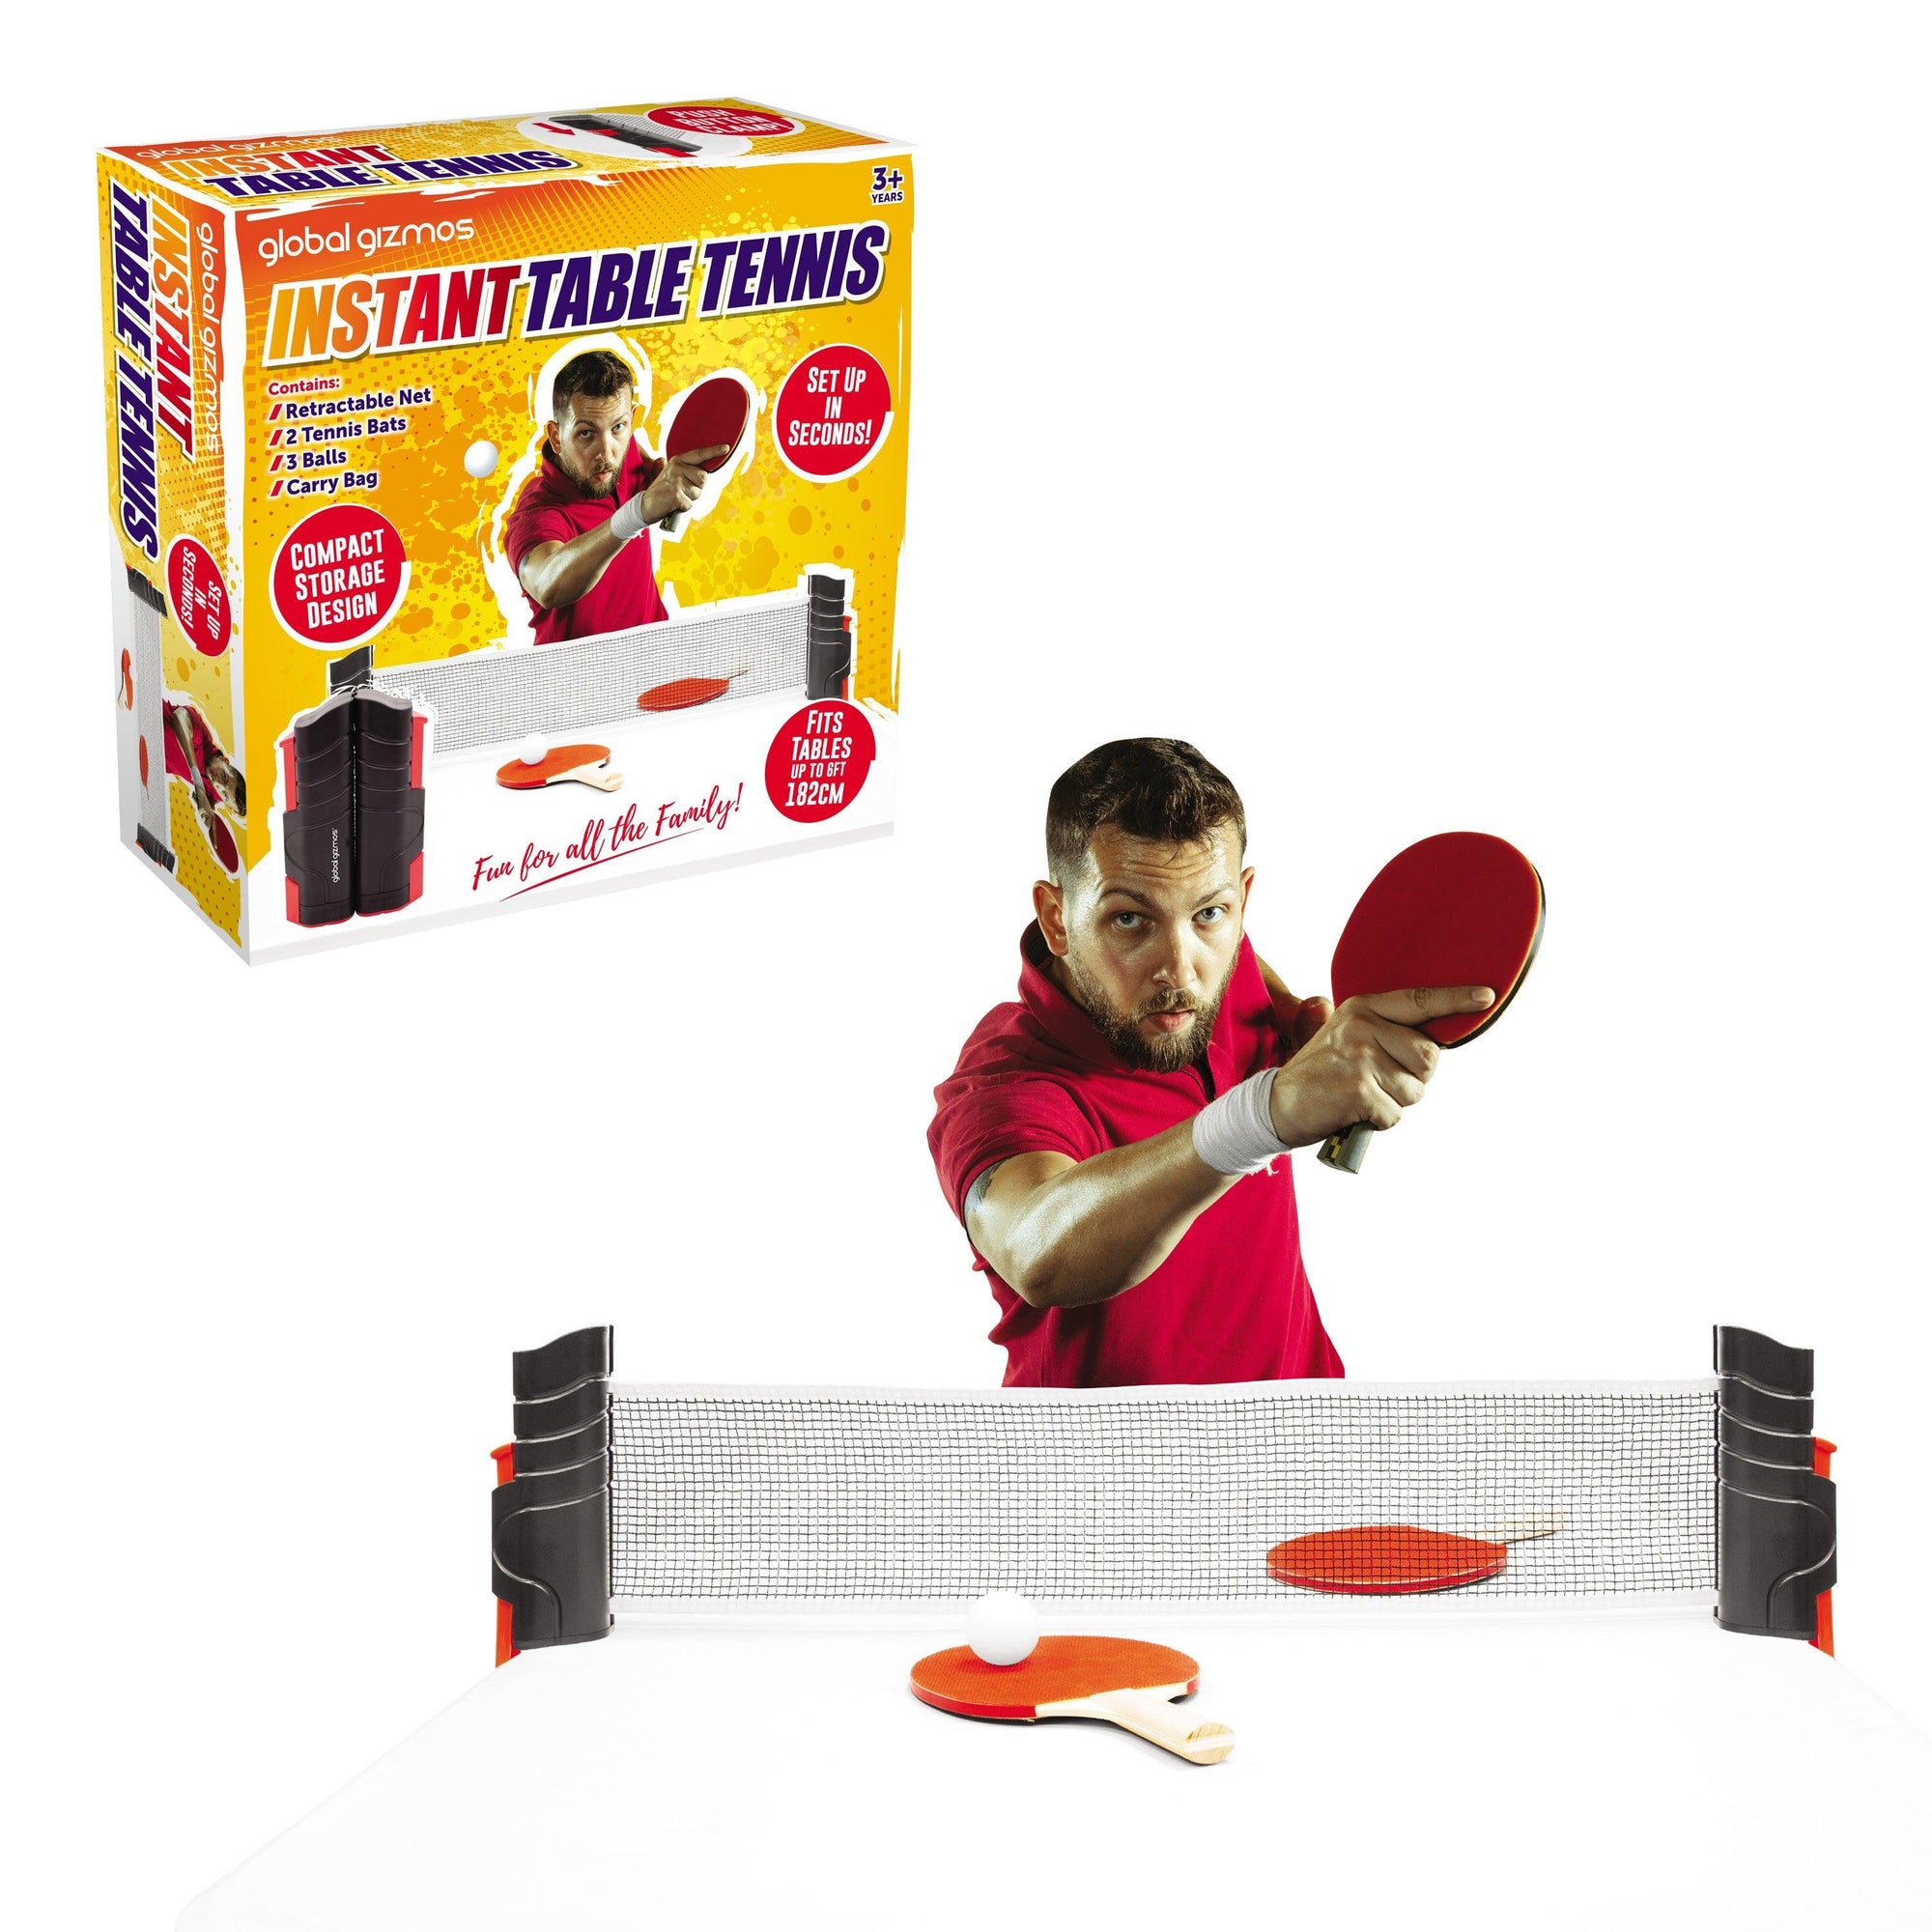 Global Gizmos | Instant Table Tennis Set - Choice Stores